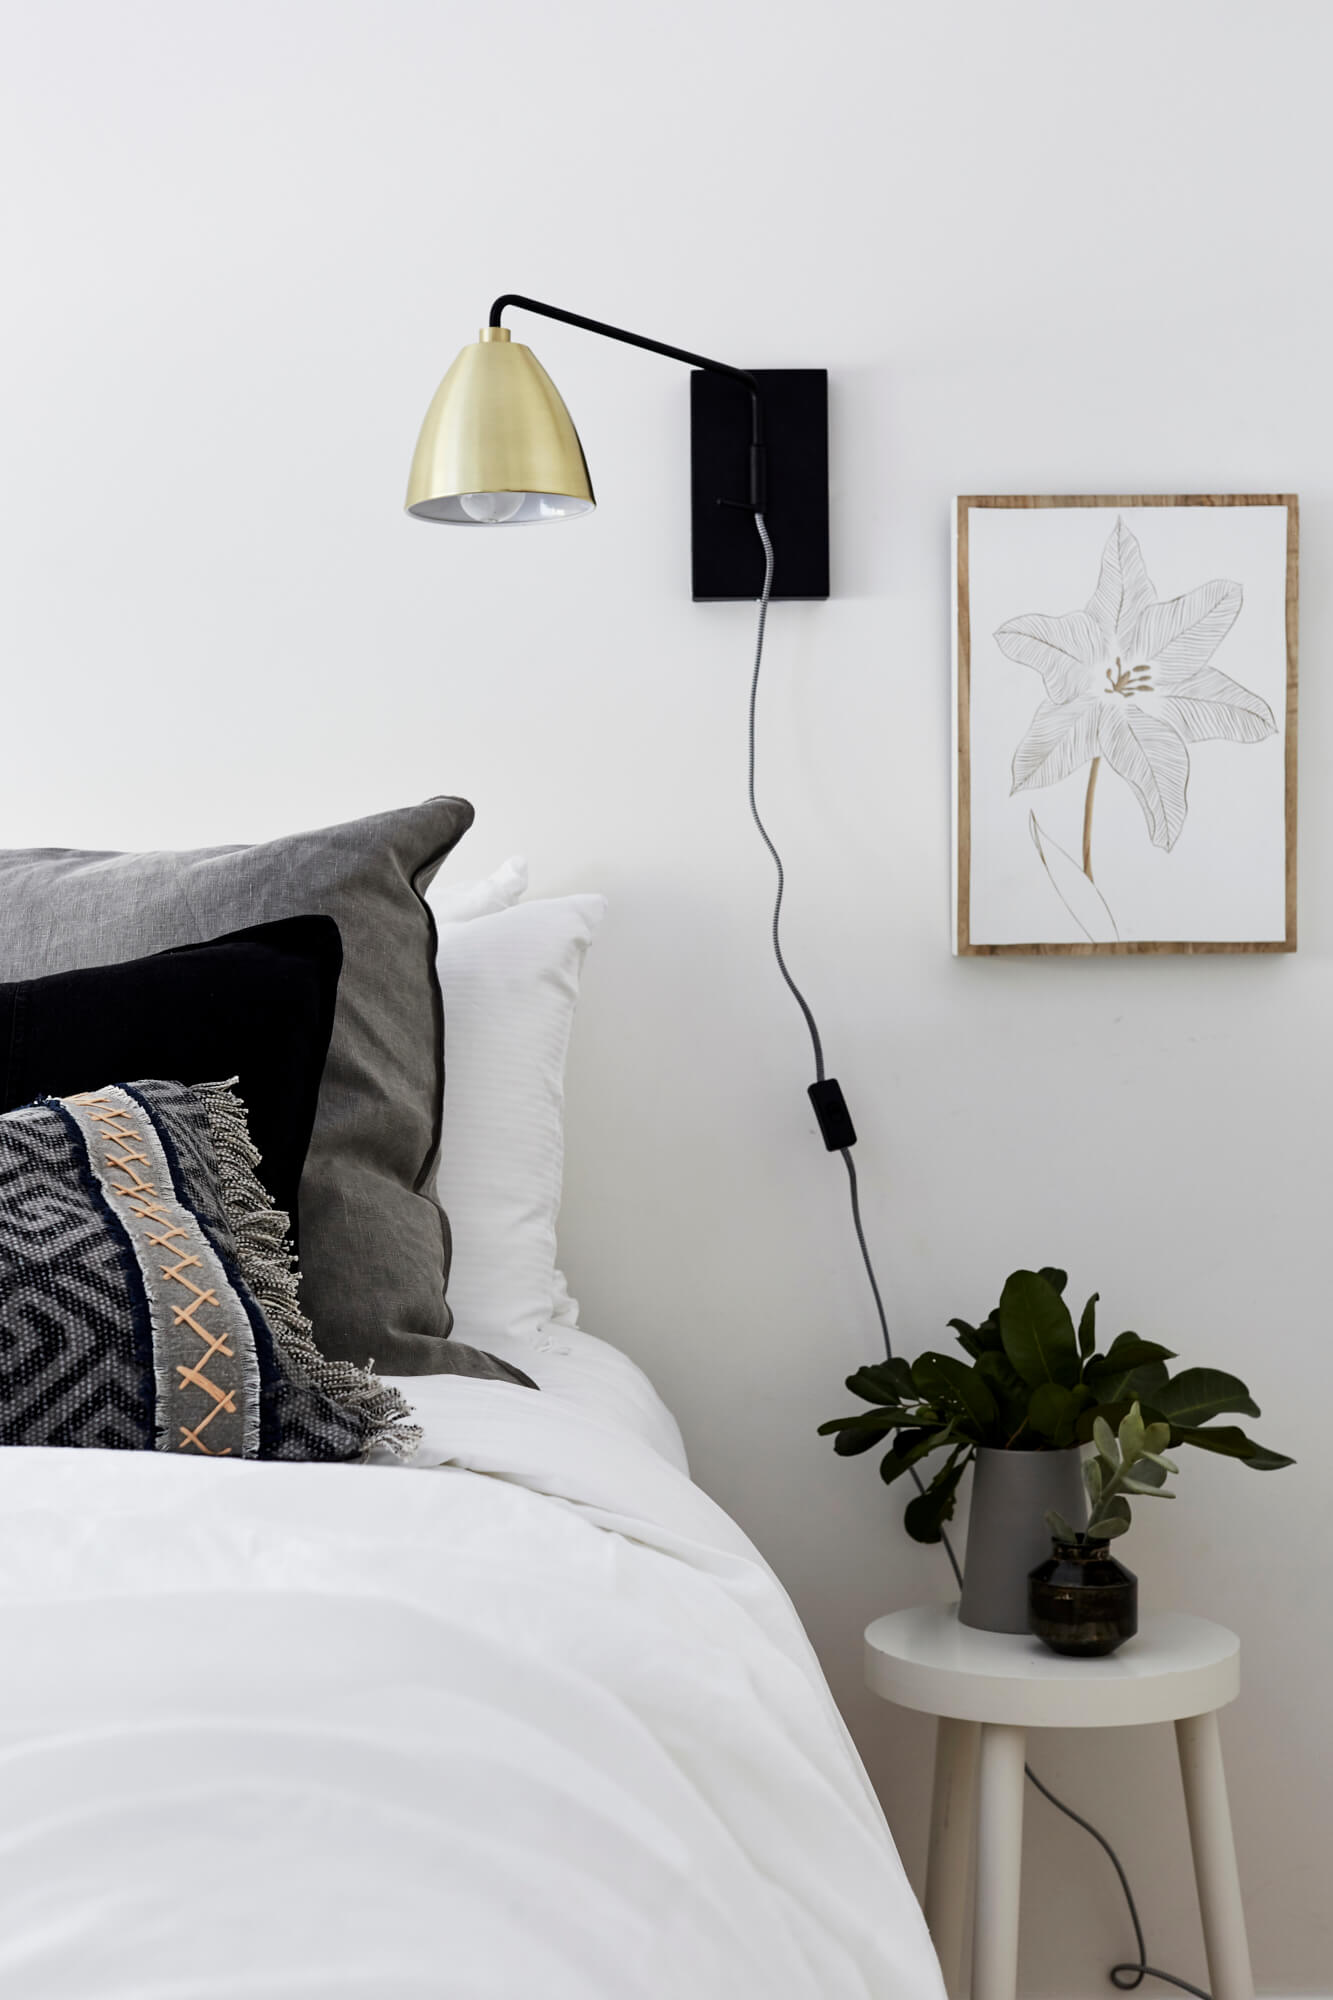 Bedrooms details at Bower House, The Bower Byron Bay with black and brass wall light, printed artwork and bed with linen and block printed cushions